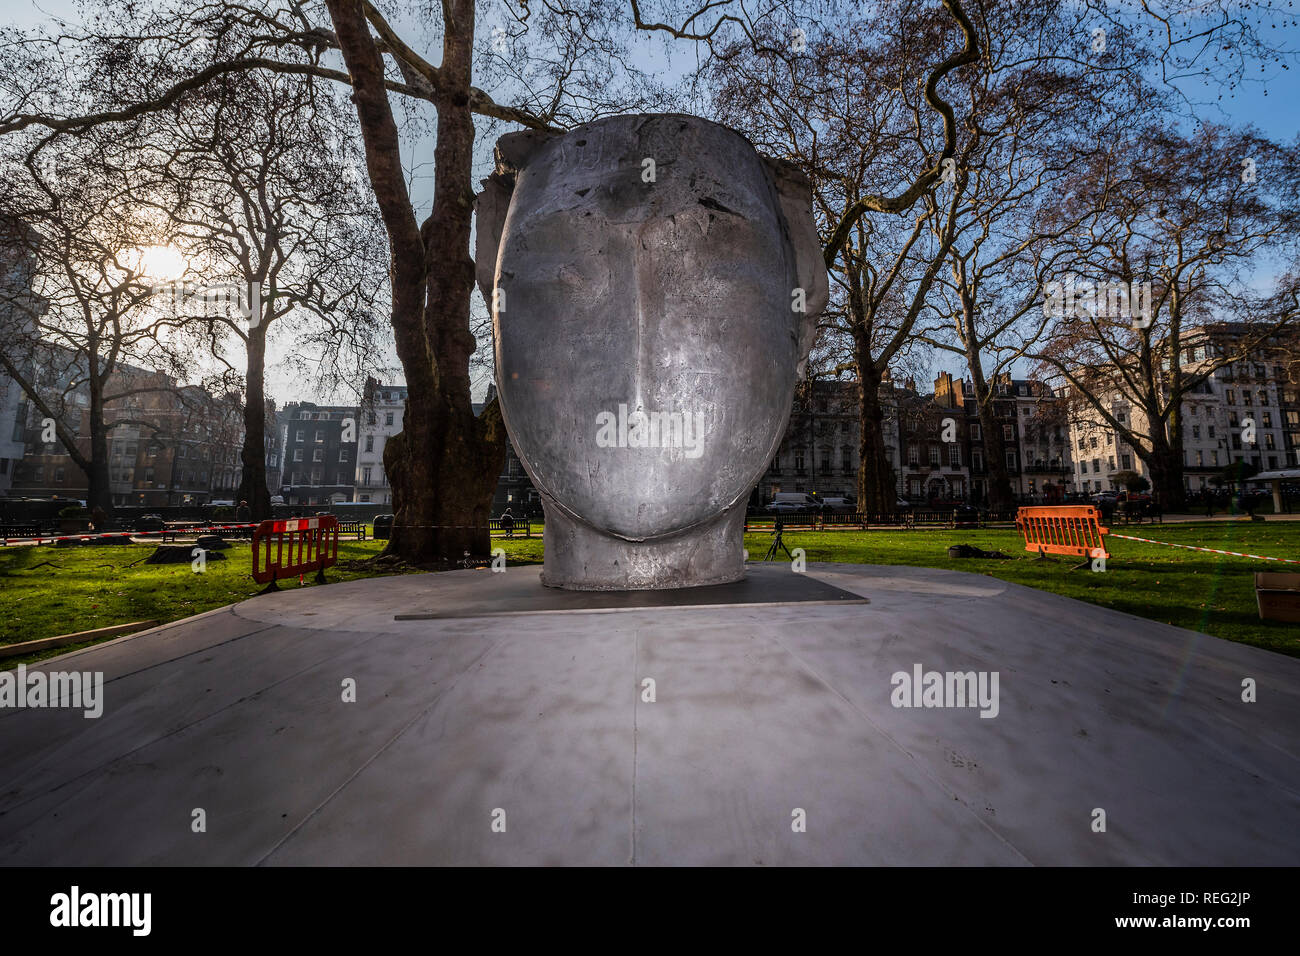 London, UK. 21st Januay 2019. The head is installed on the plinth - Butterflies by Spanish artist Manolo Valdés launched by Opera Gallery. The sculpture was installed at Berkeley Square in London today, and is one of the eight sculptures included in City of London’s Sculpture in the City initiative that aims to turn the city into an urban gallery space. Weighing over five tonnes, the giant sculpture will be residing at its Mayfair location for six months. Credit: Guy Bell/Alamy Live News Stock Photo